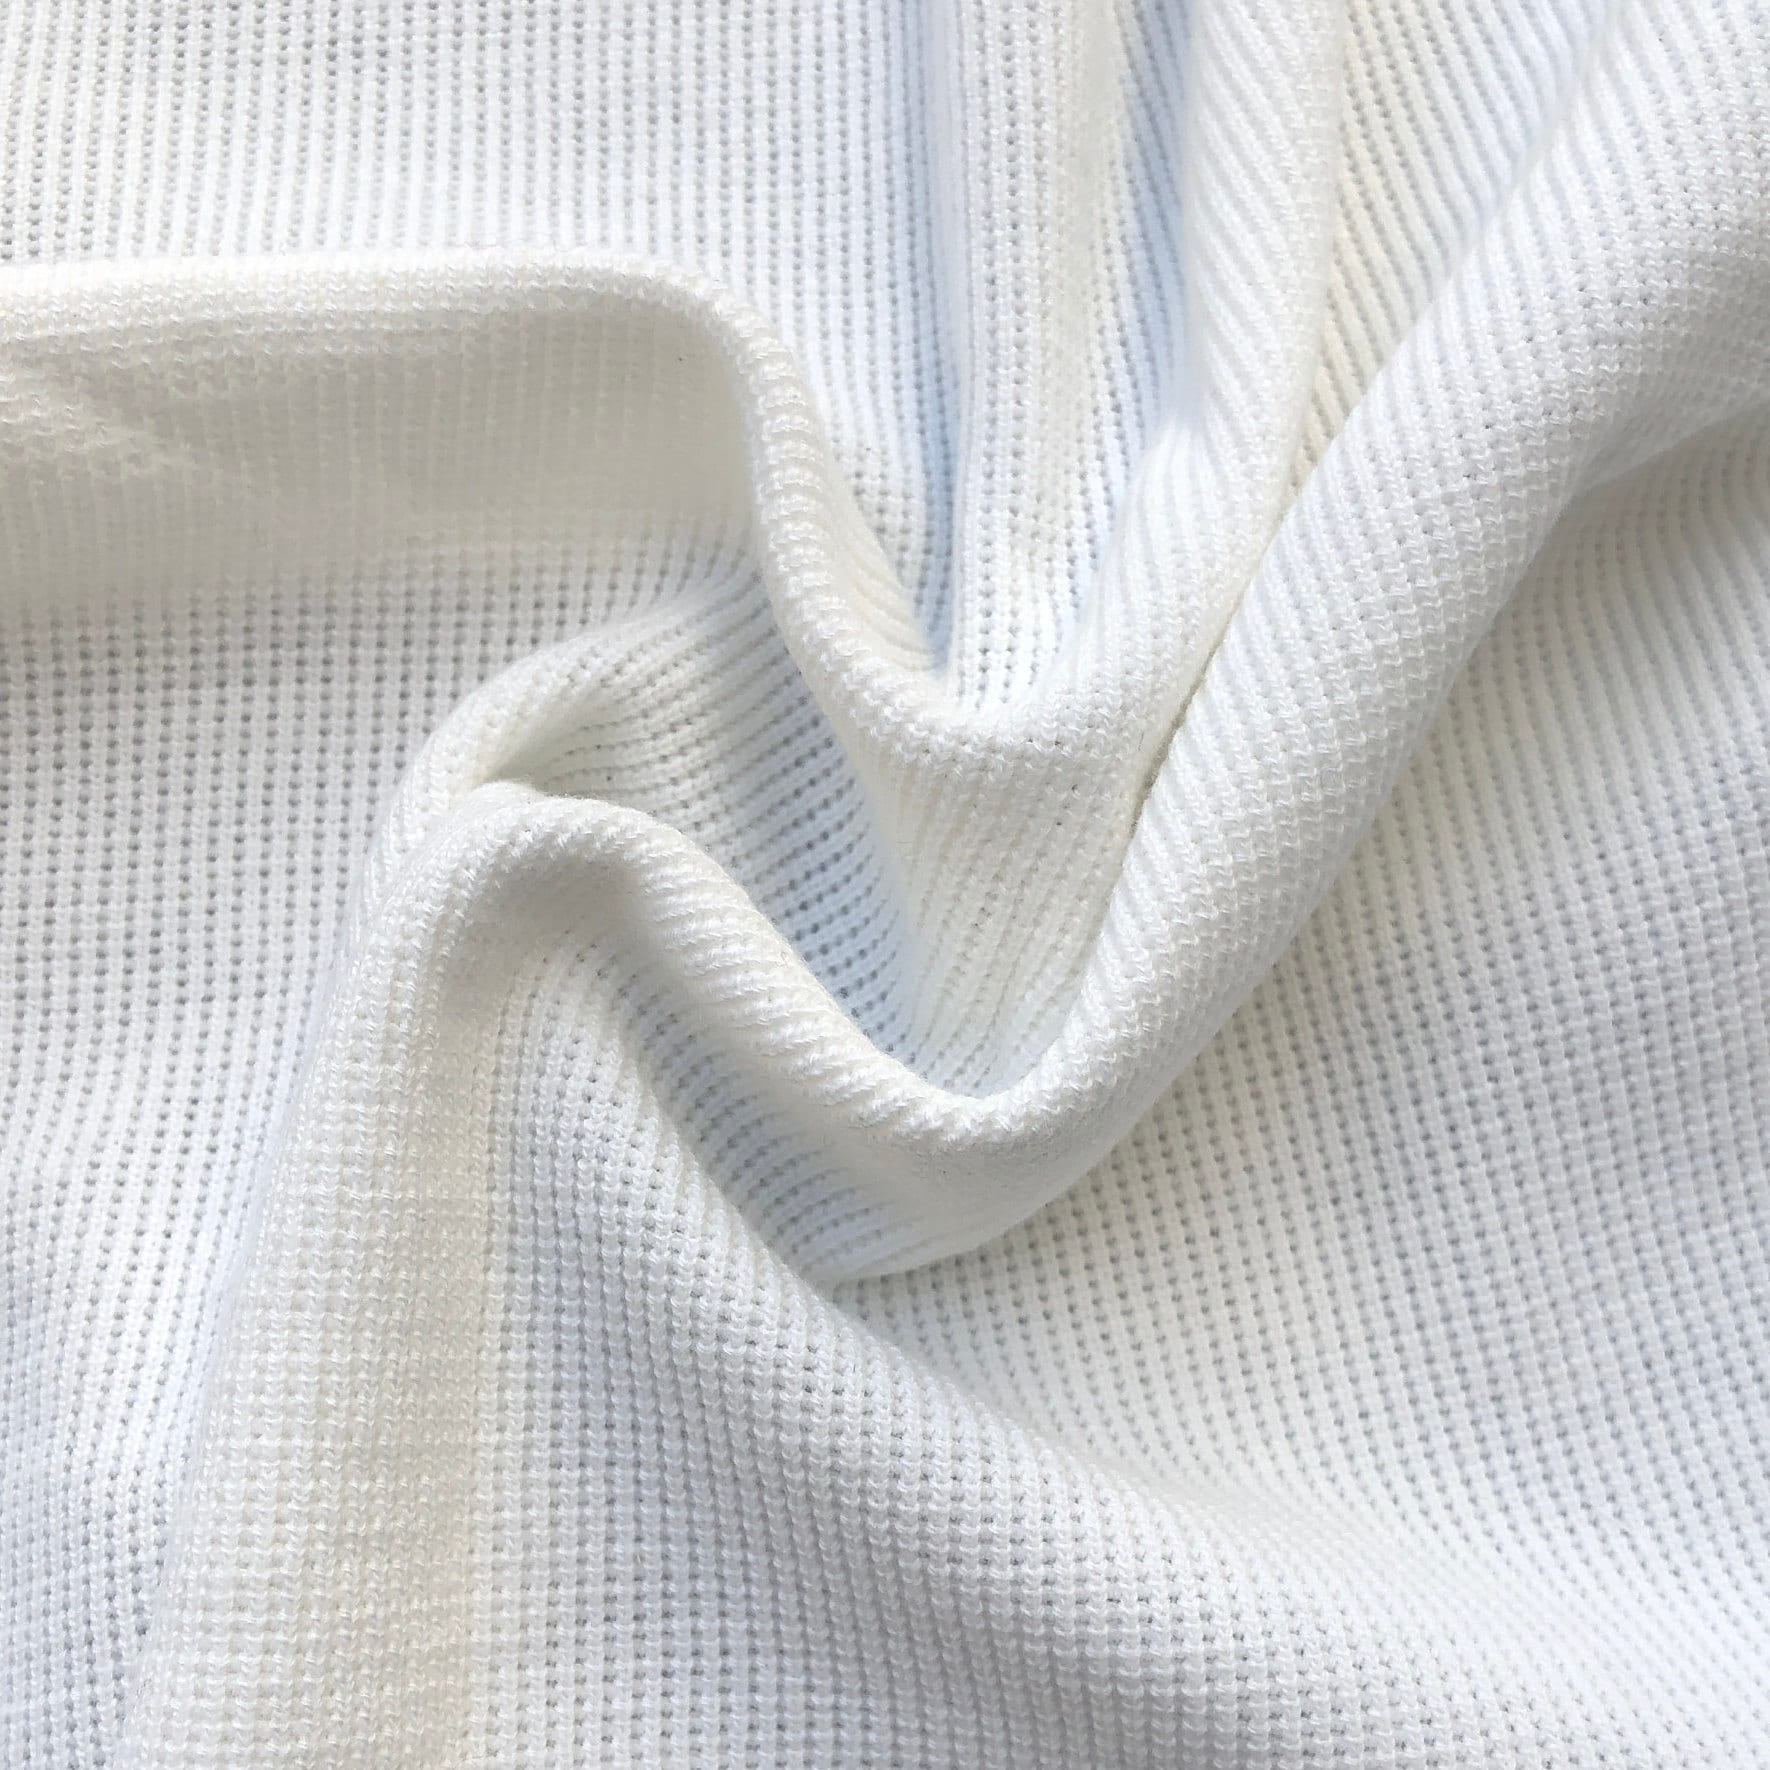 58 100% Cotton PFD White Baby Thermal Knit Fabric By the Yard